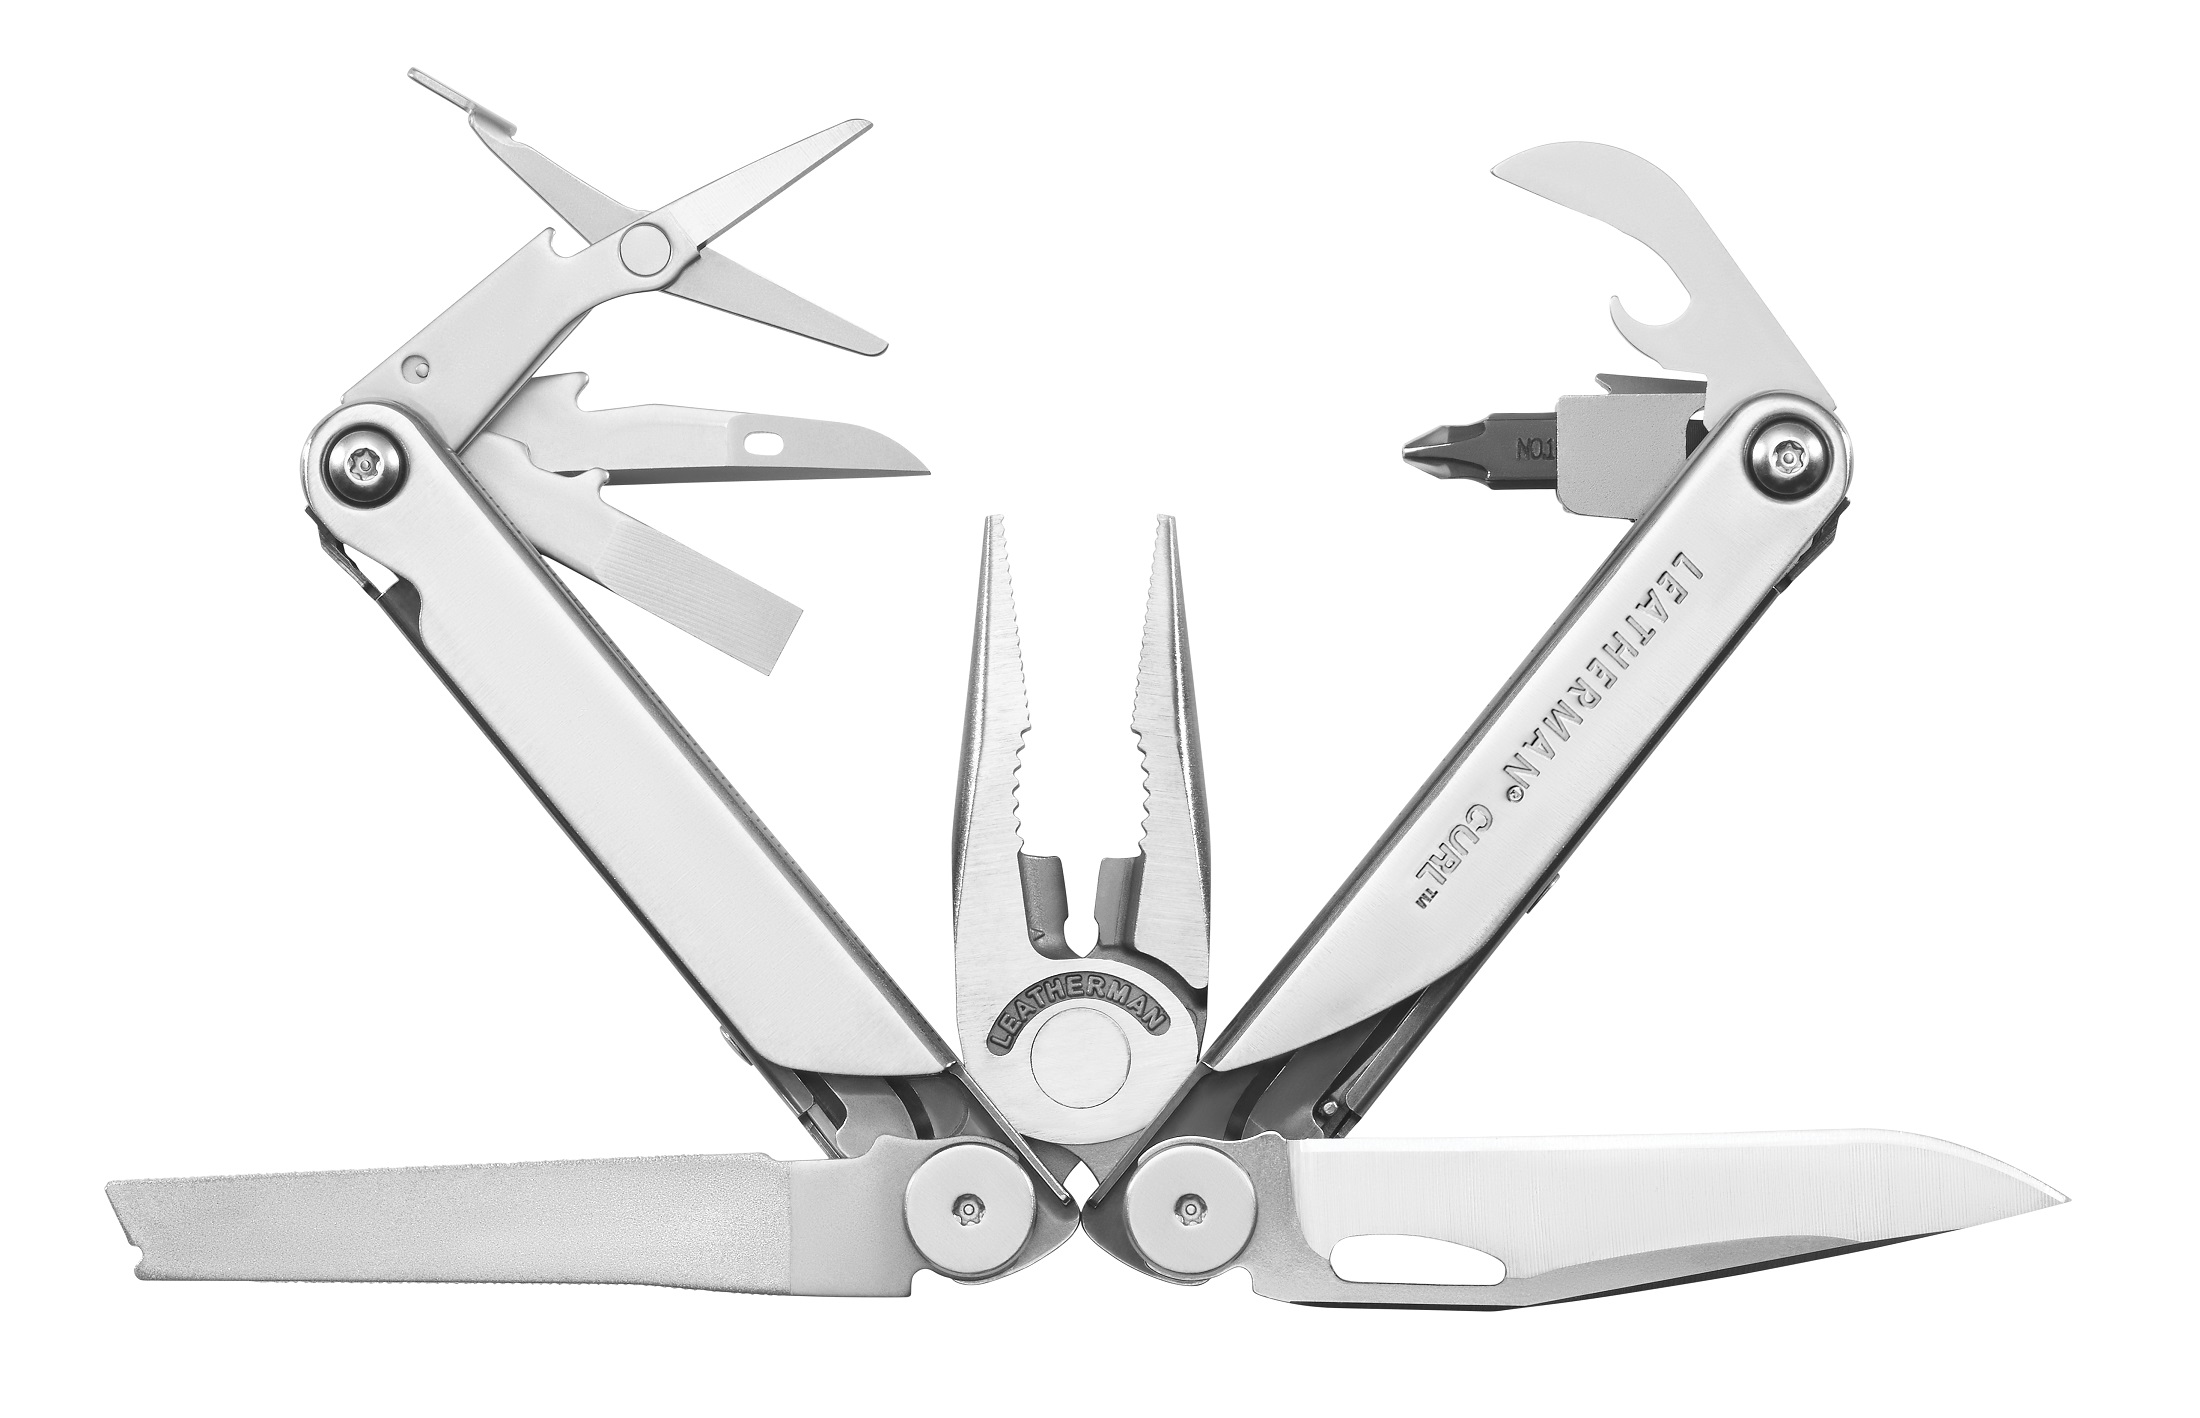 The New Leatherman Curl Multi-Tool with Bit Kit Compatibility